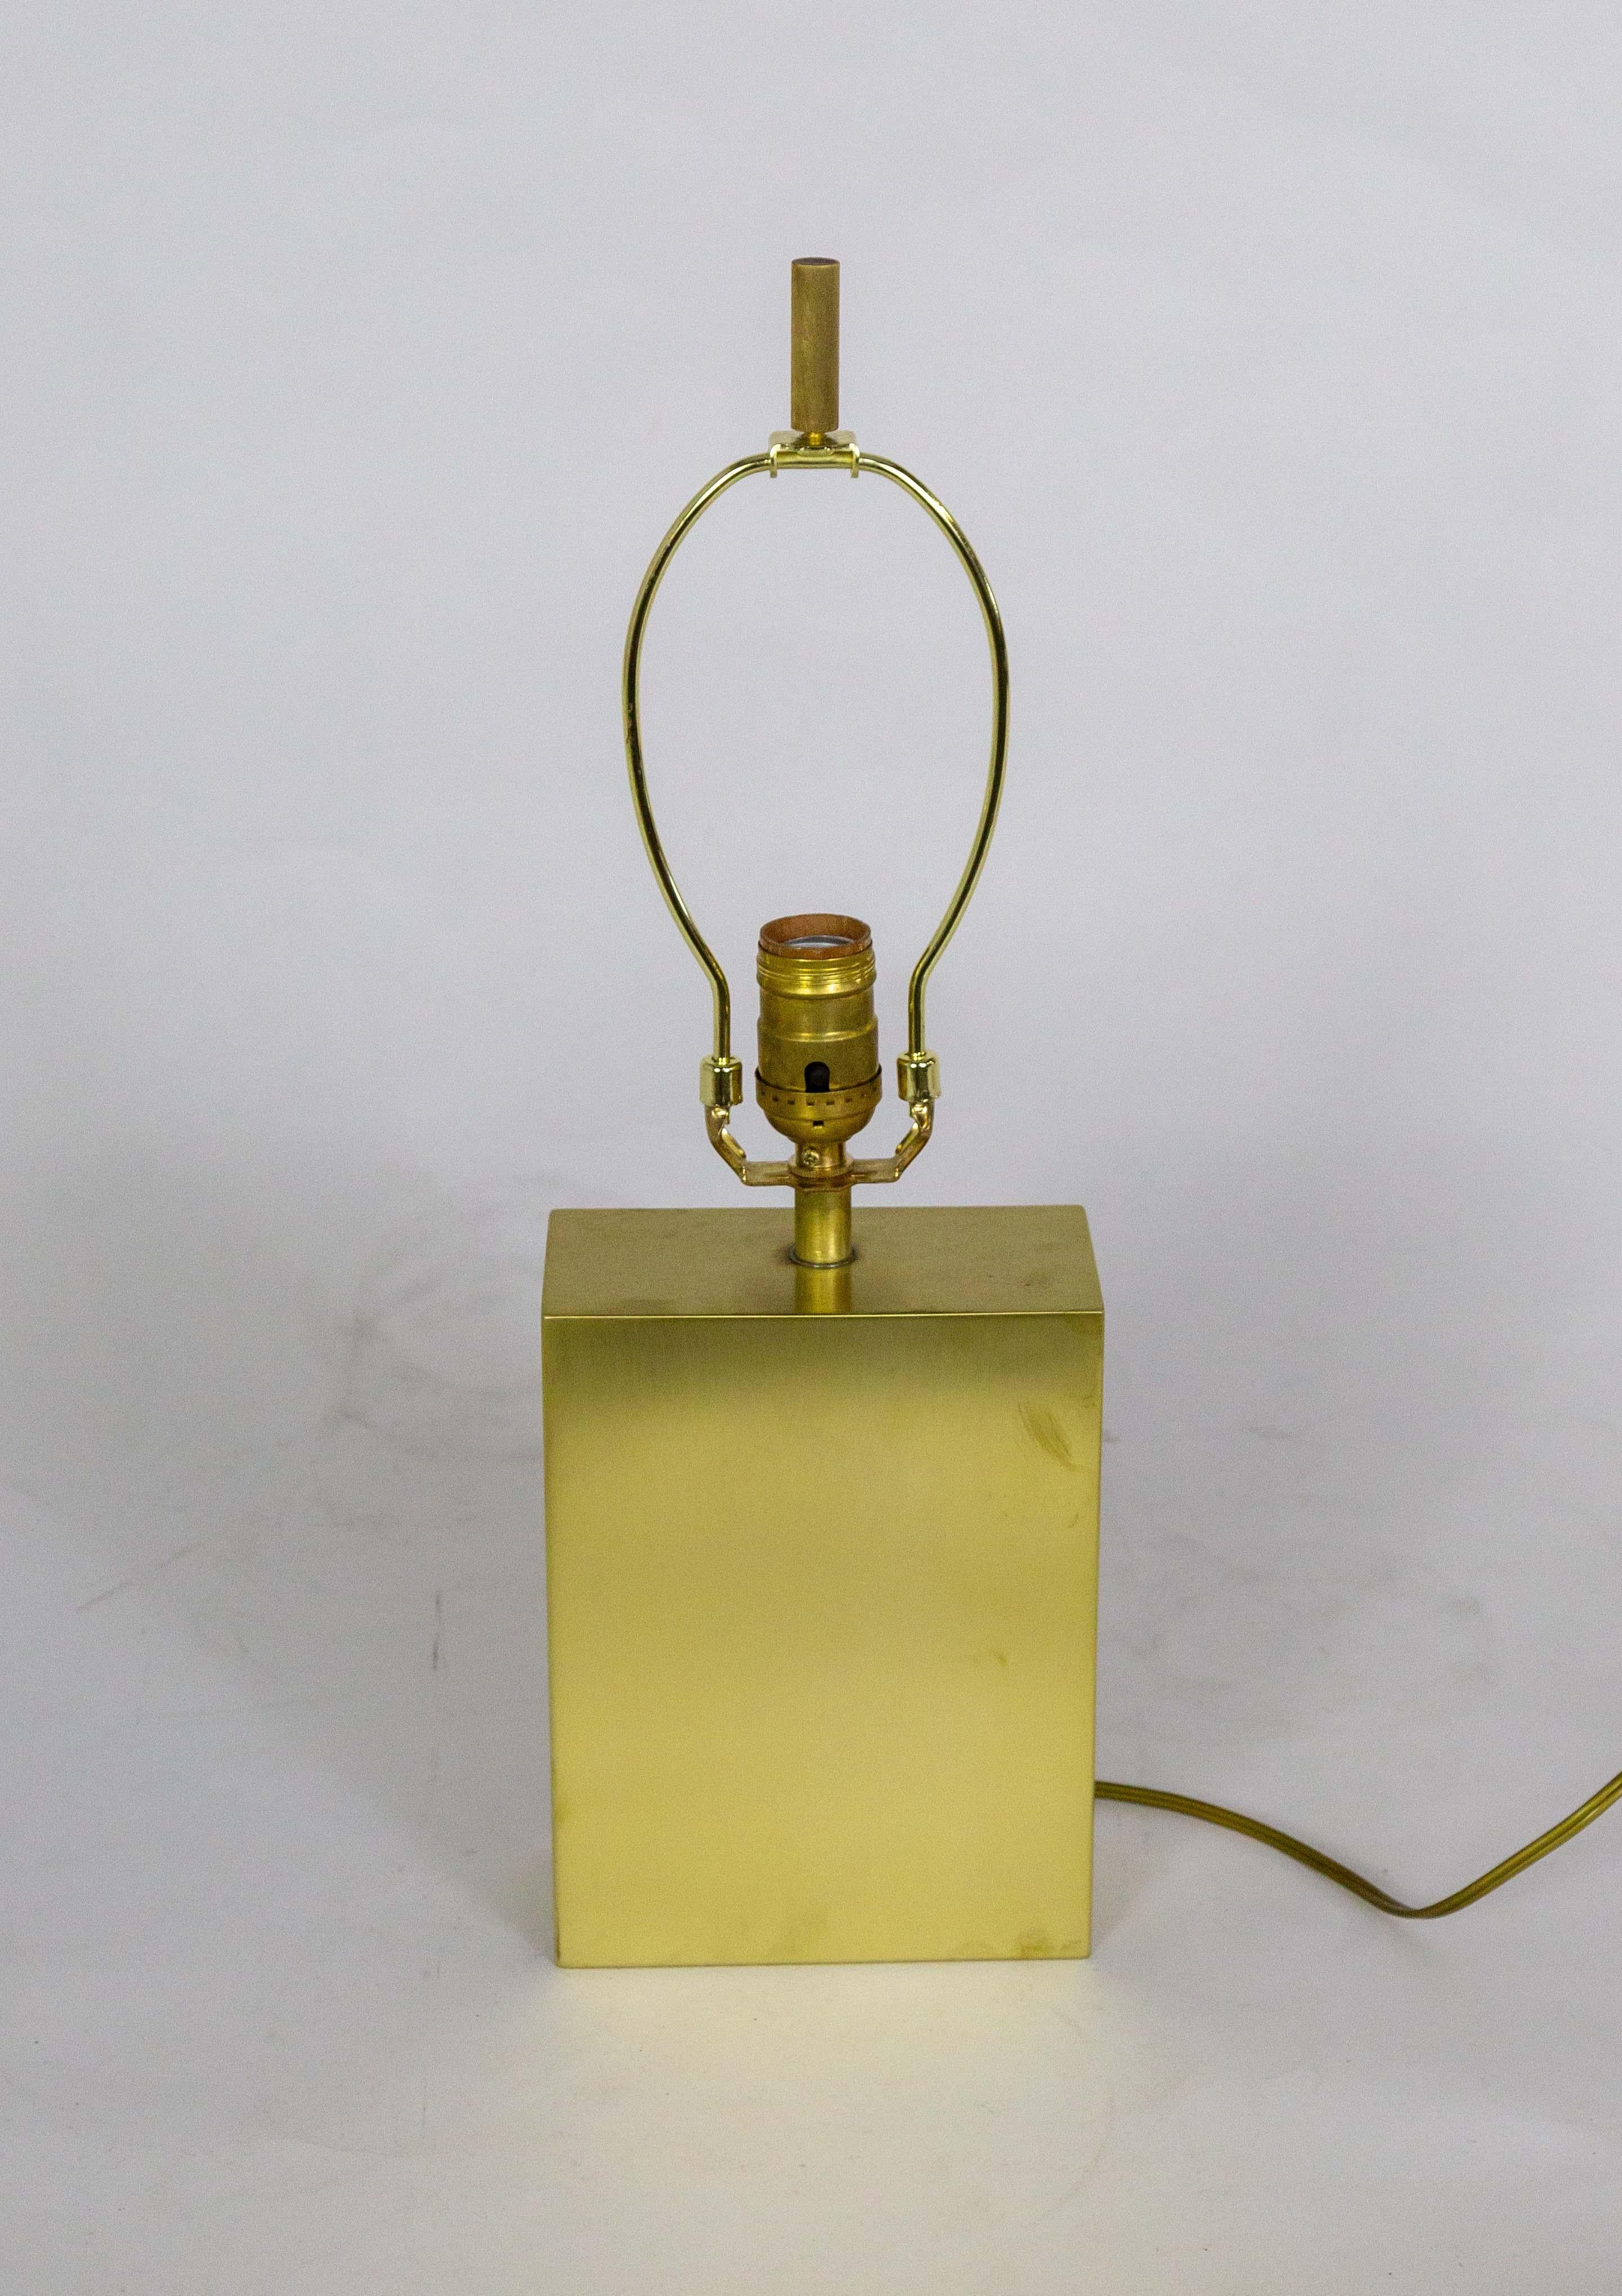 A small, versatile, vintage table lamp with a clean, slick look. It is a rectangular shape made of raw brass, with a 